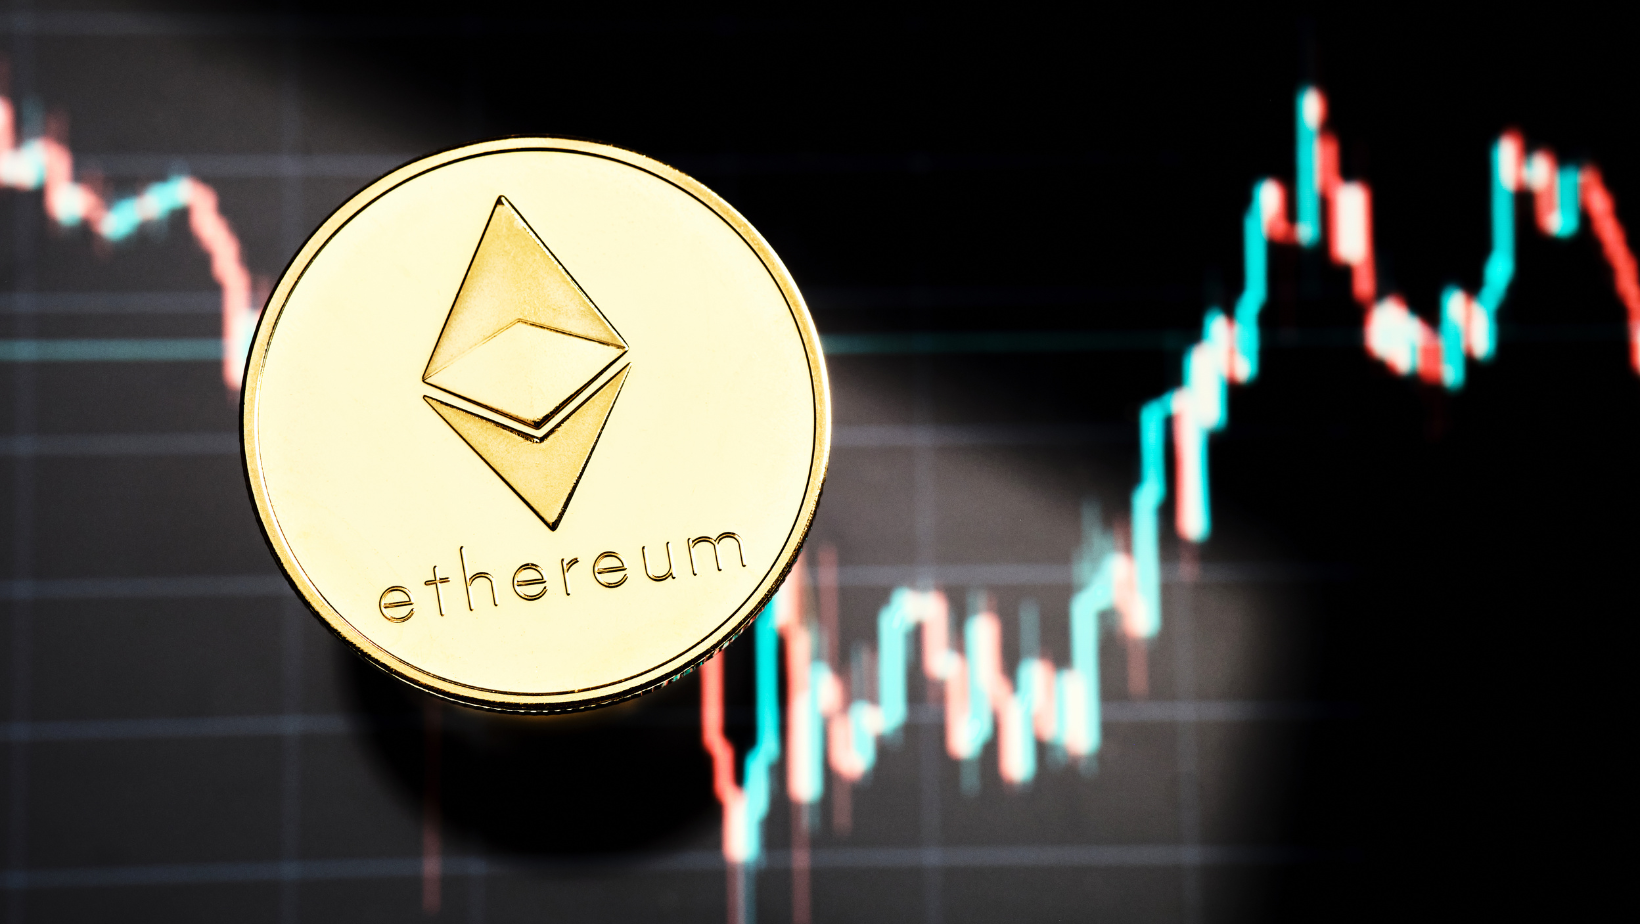 Ethereum's price soars as SEC probe concludes